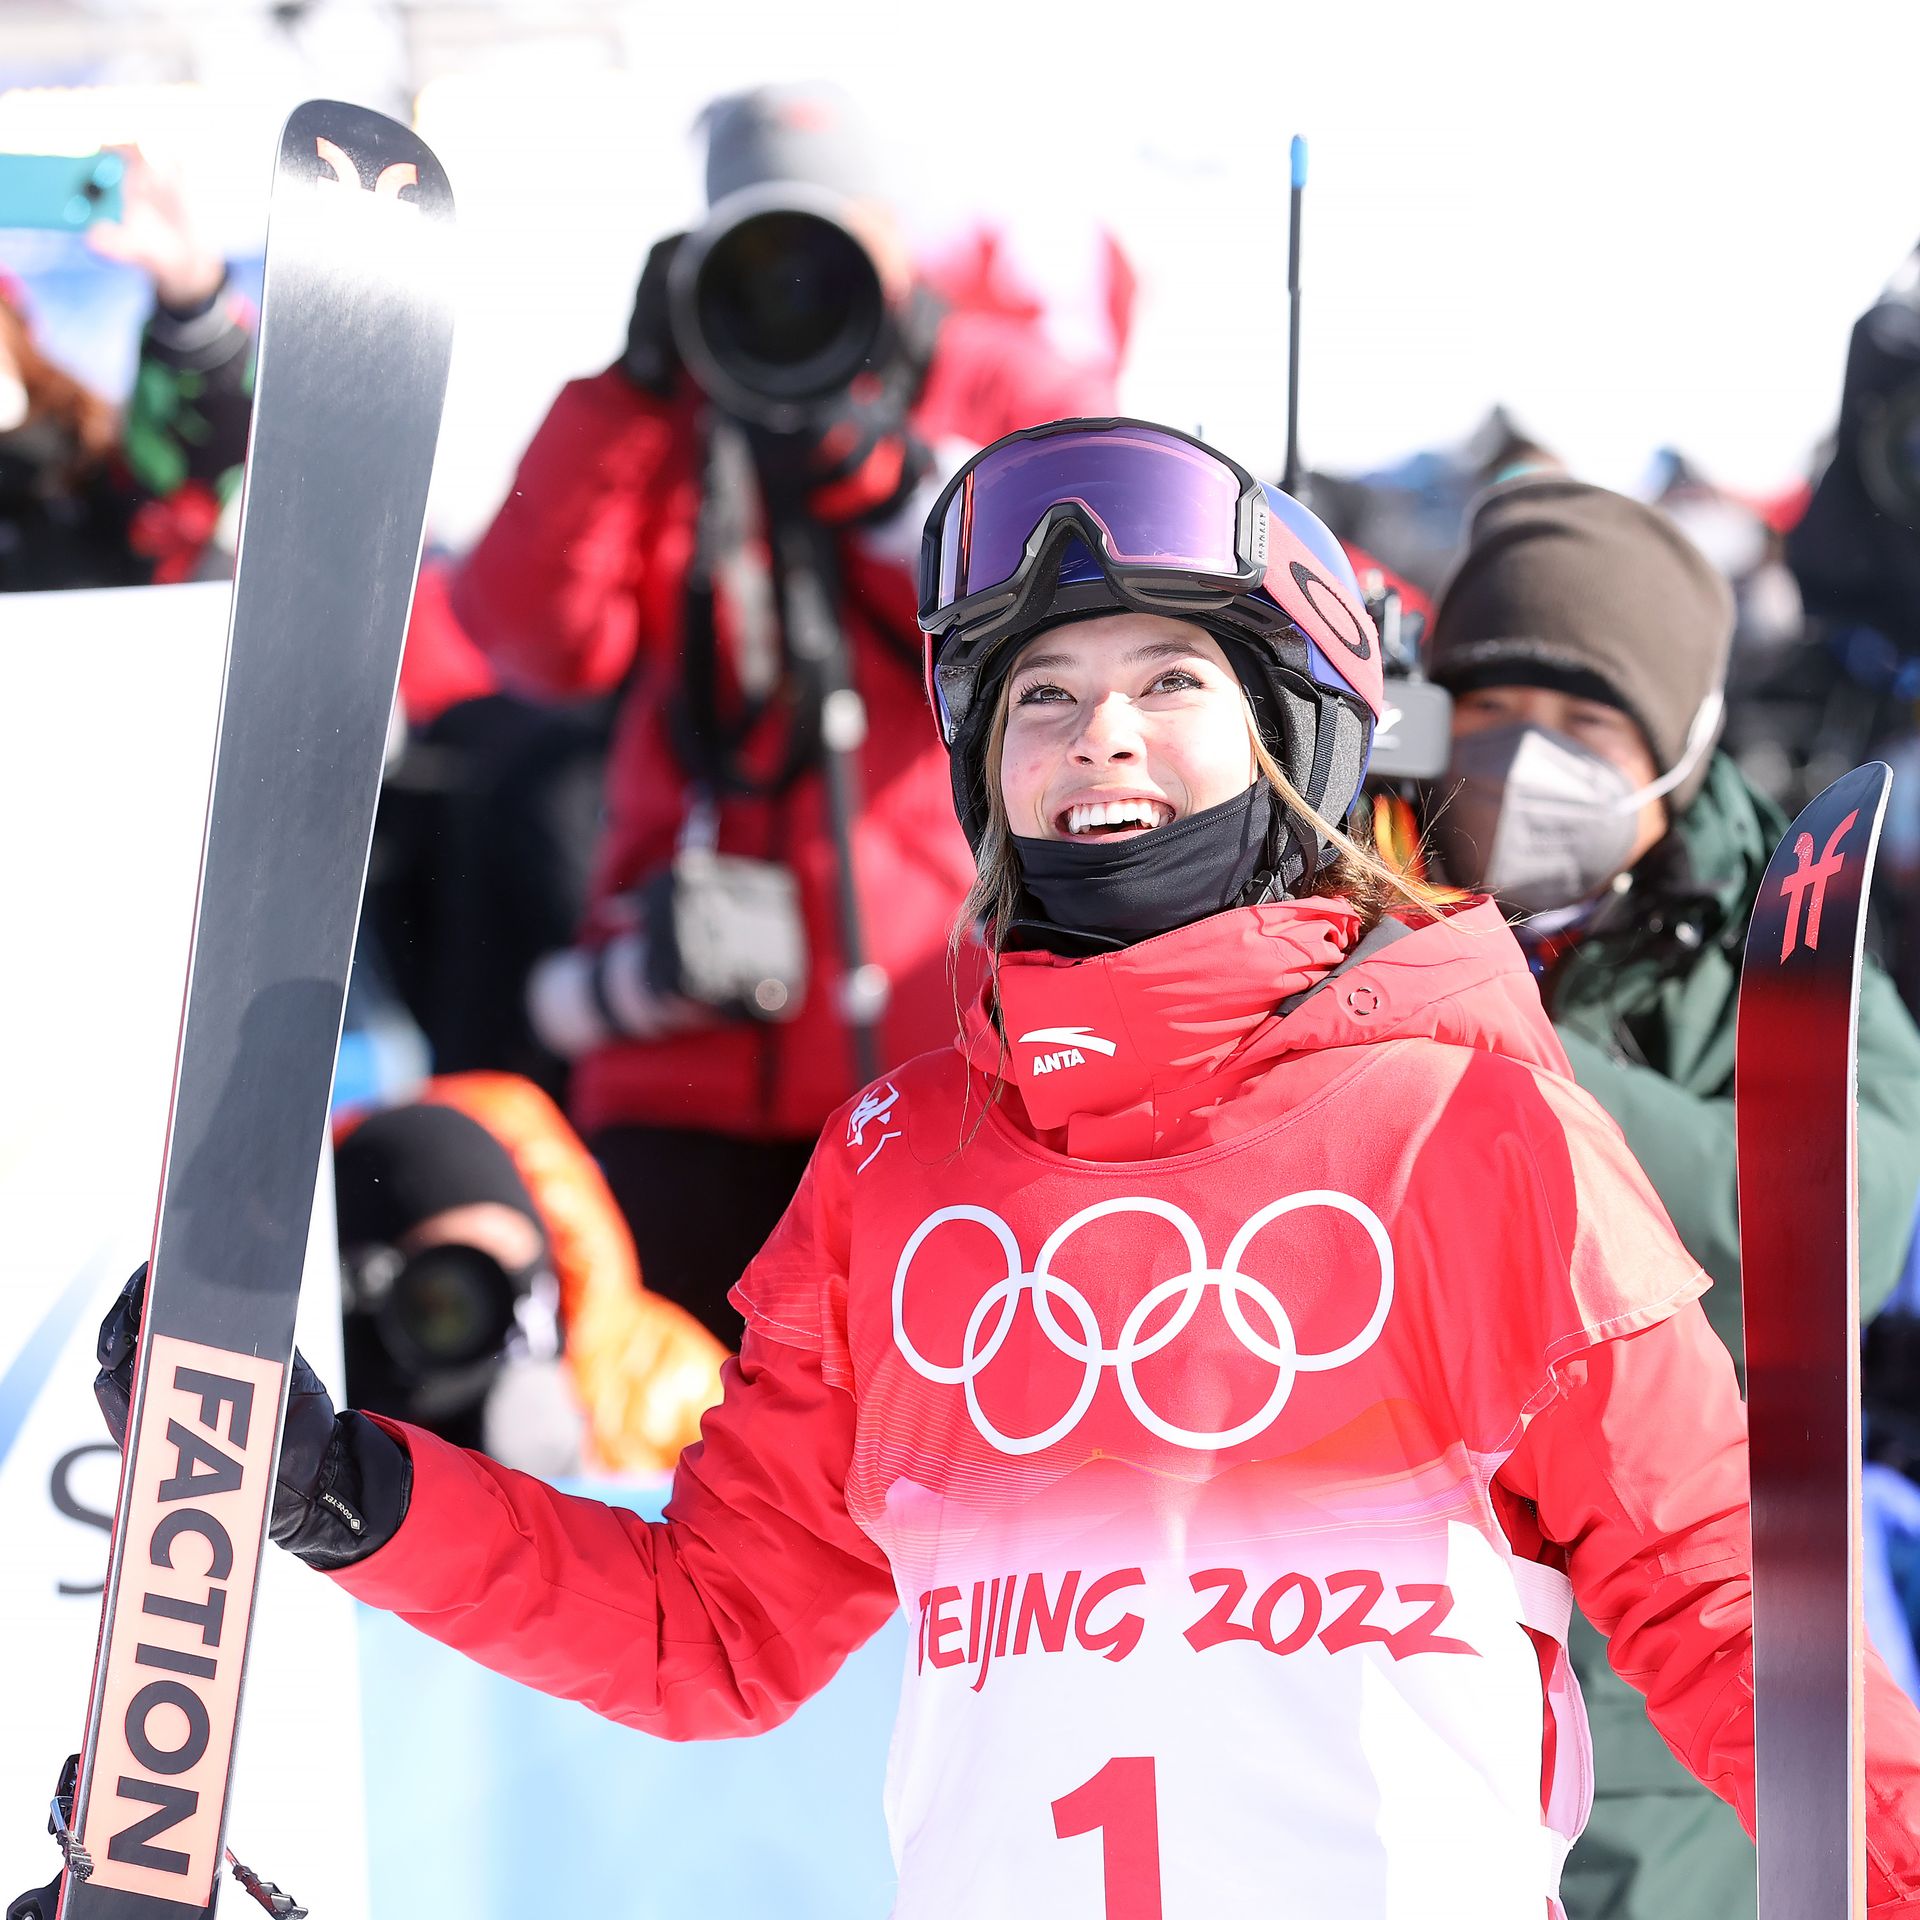 Eileen Gu wins halfpipe gold, her third medal at 2022 Winter Olympics